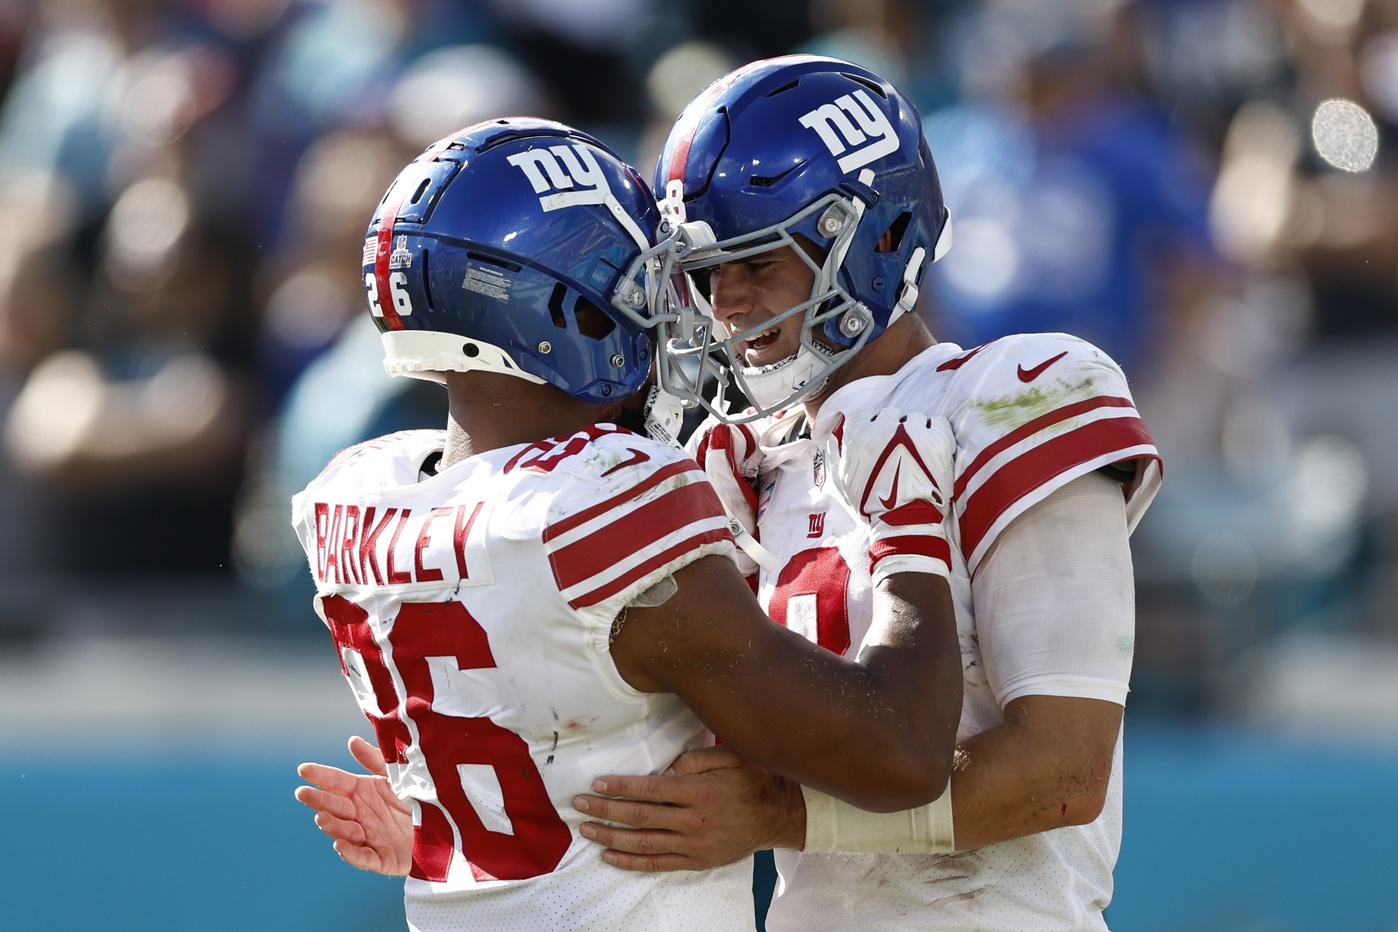 Best NFL prop bets for Giants vs. Commanders on Sunday Night